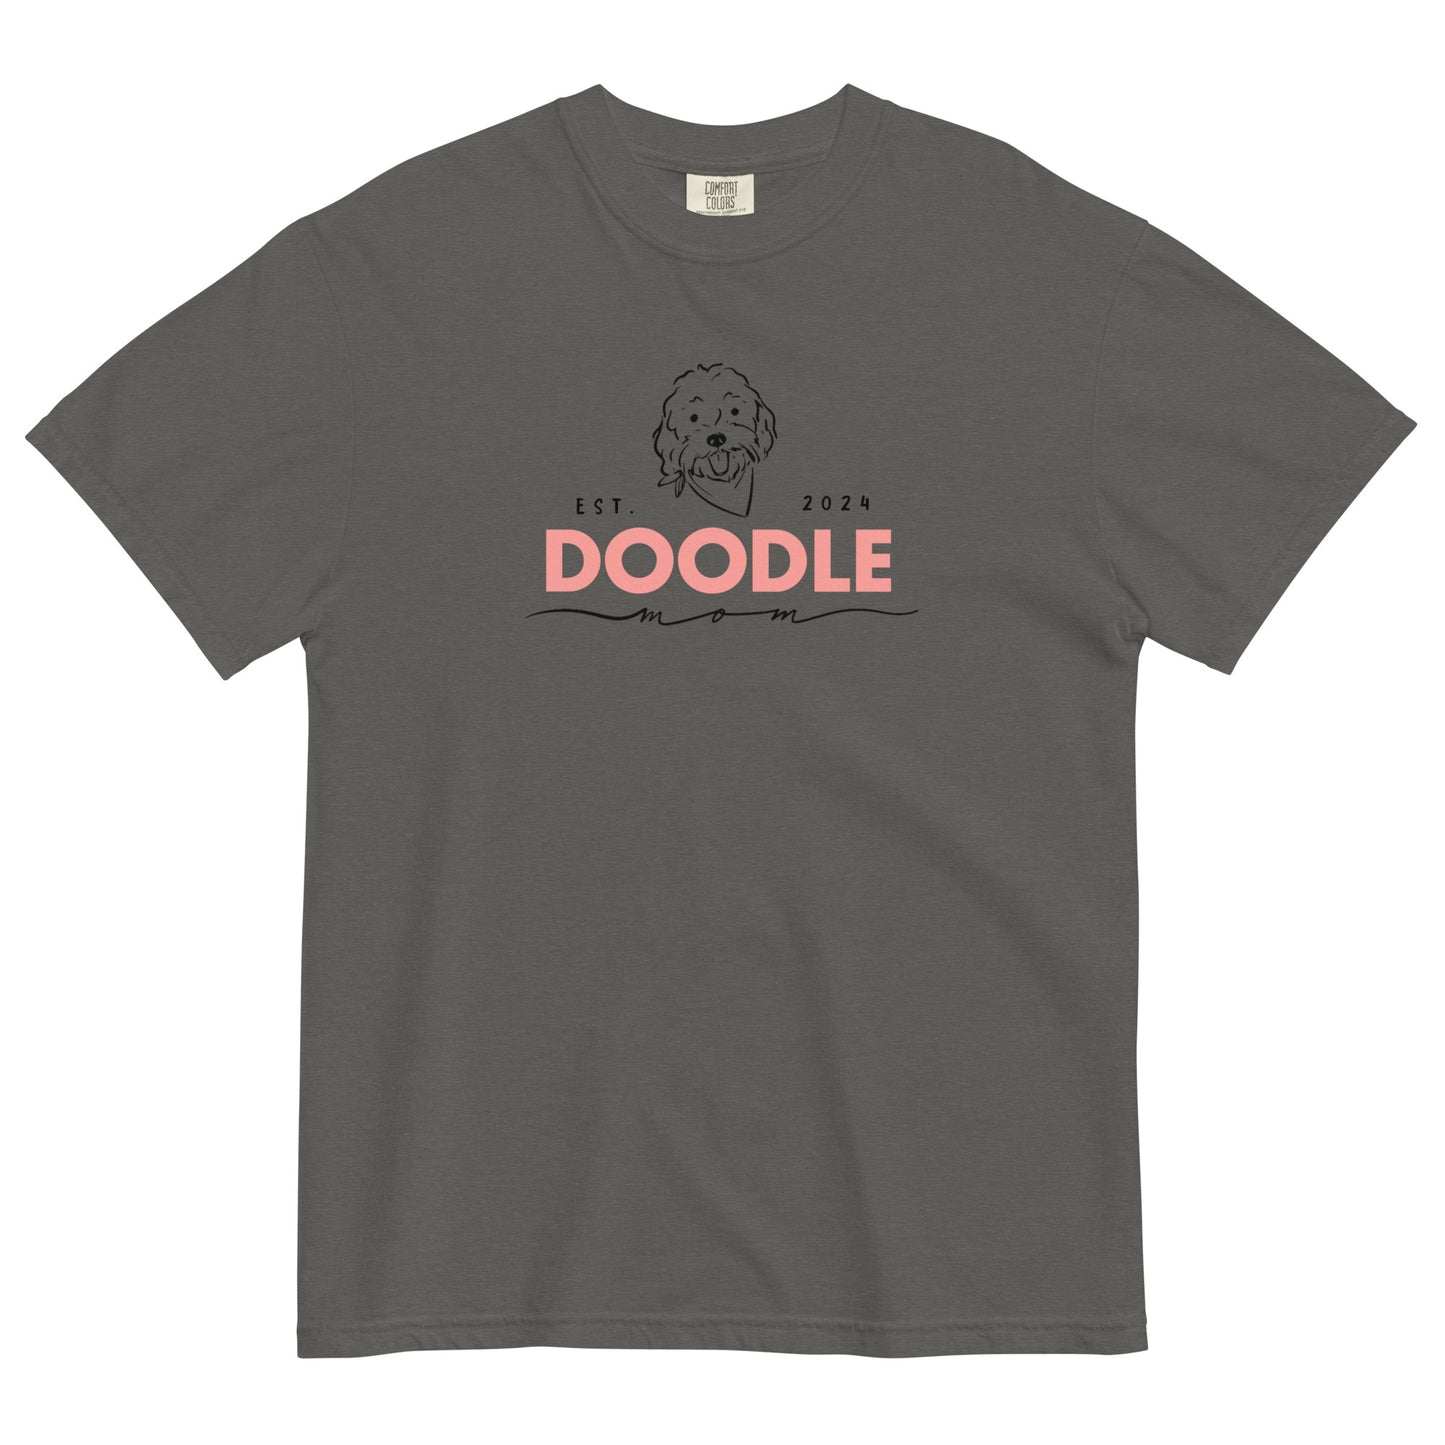 This Doodle T-shirt features the message, "Doodle Mom Est. 2024" with a cute Doodle dog's face printed on the front of a cozy Comfort Colors T-Shirt. The tag inside the shirt says Comfort Colors